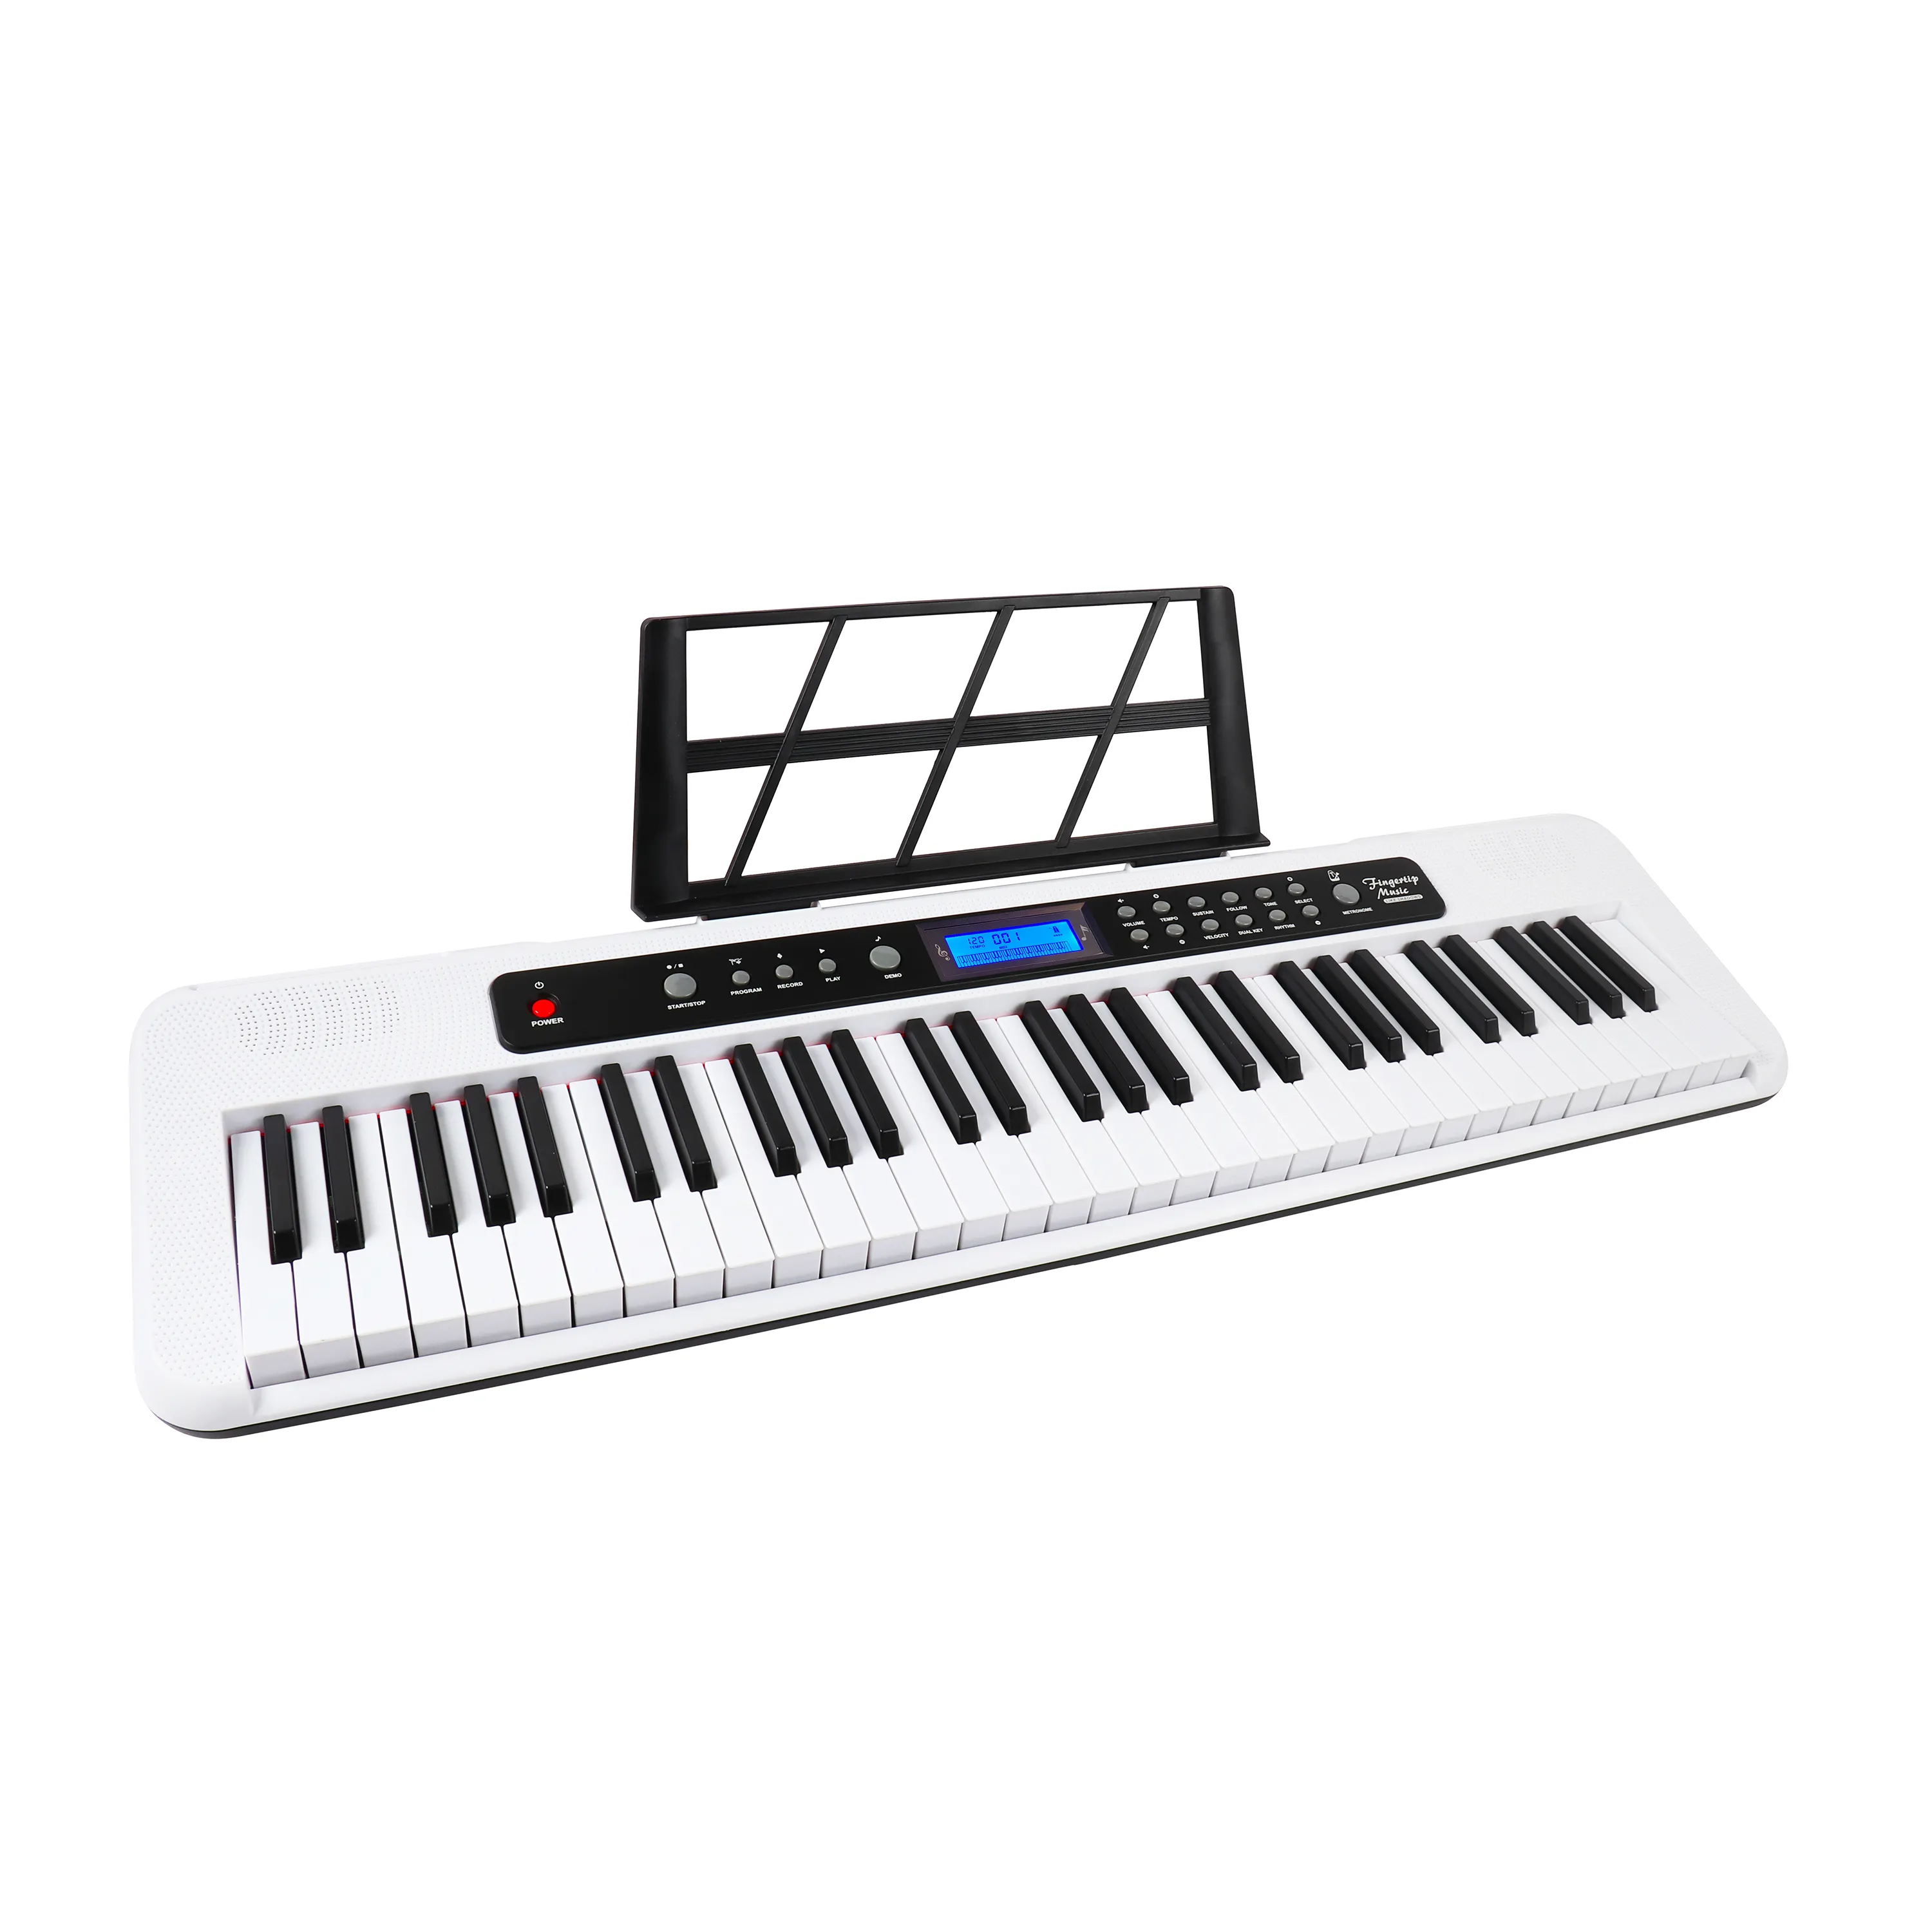 White musical keyboard piano 61 keys standard keyboard synthesizer with touch response and LCD Screen display